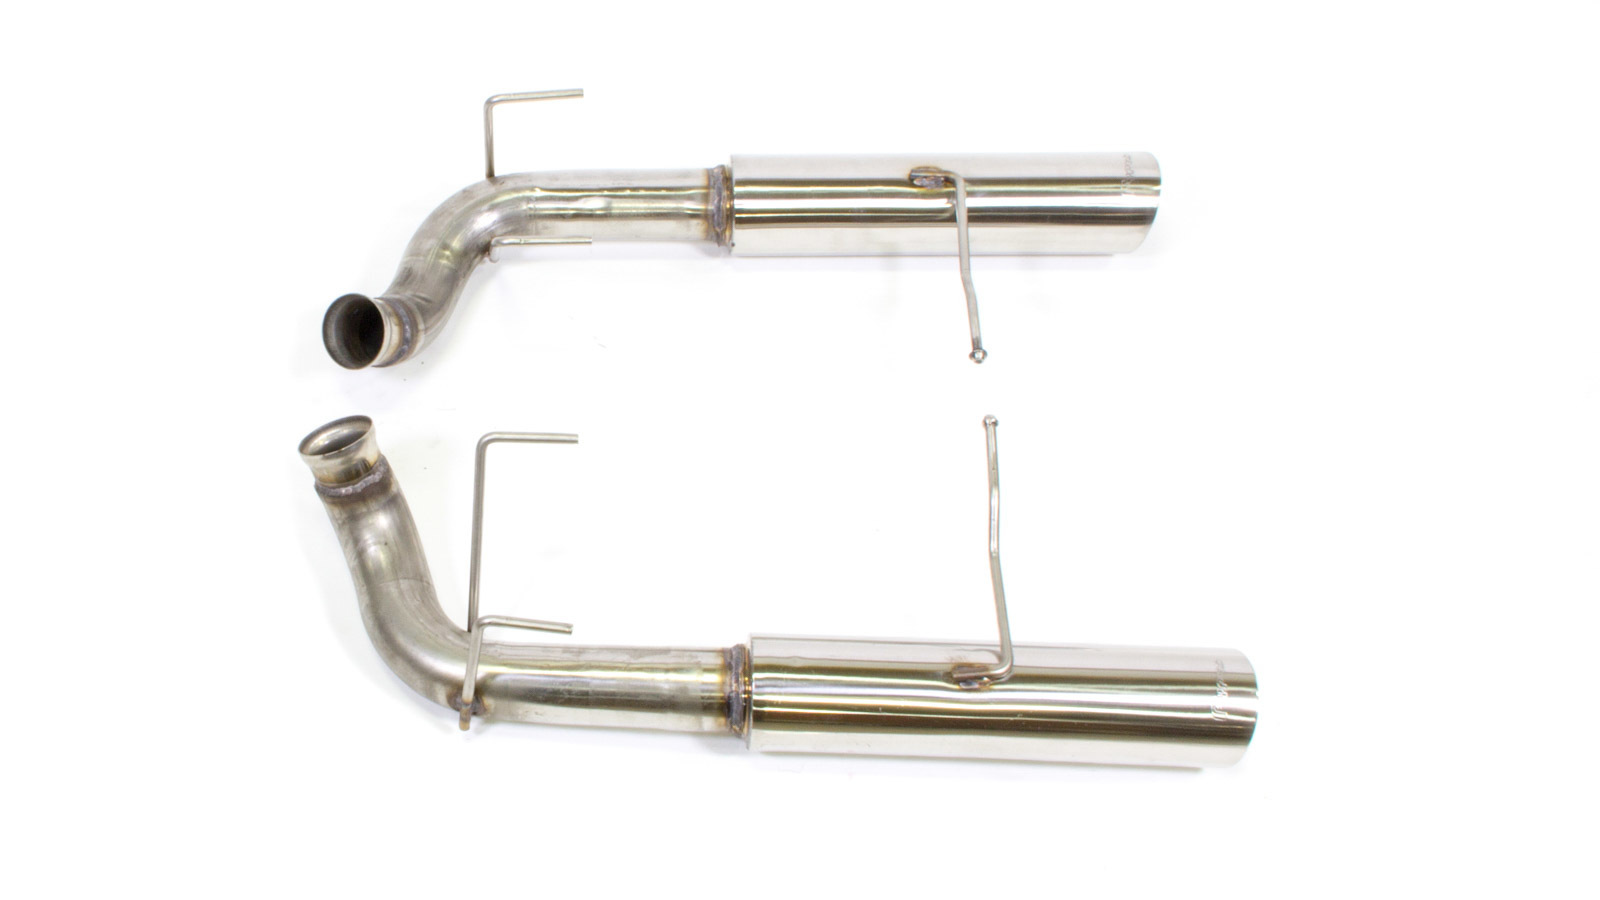 Pypes Exhaust System, Pype Bomb, Axle-Back, 2-1/2" Dia. 4" Tips, Stainless, V6, Ford Mustang 2011-14, Kit